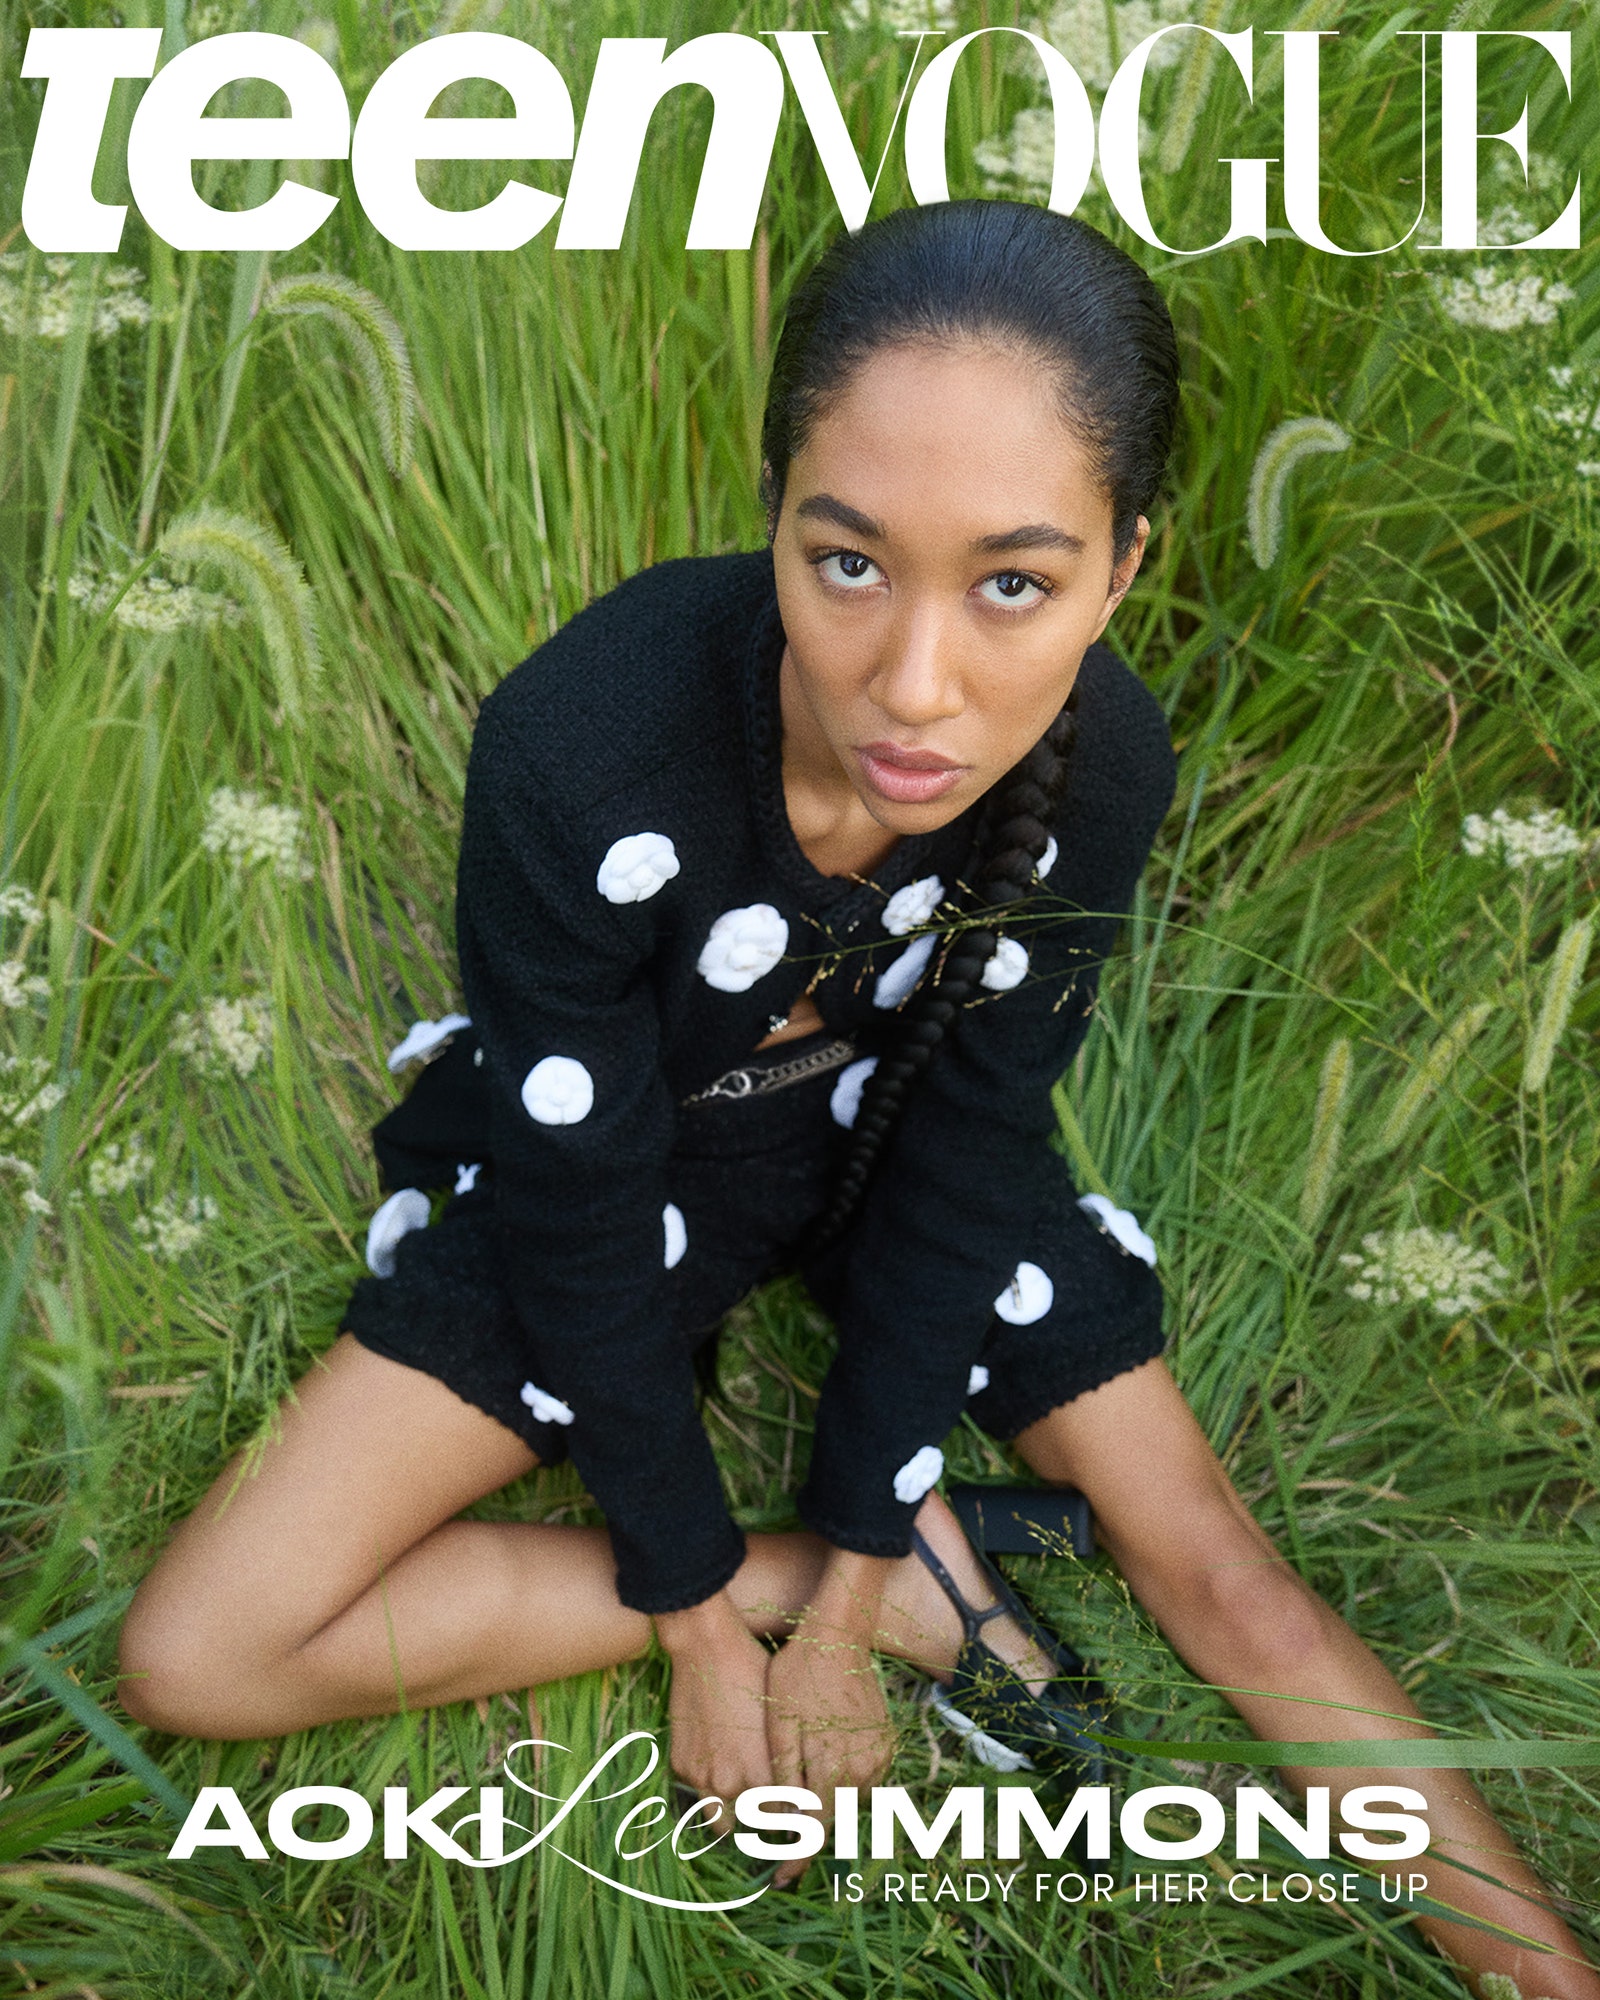 Aoki Lee Simmons wearing polka dots sitting in grass